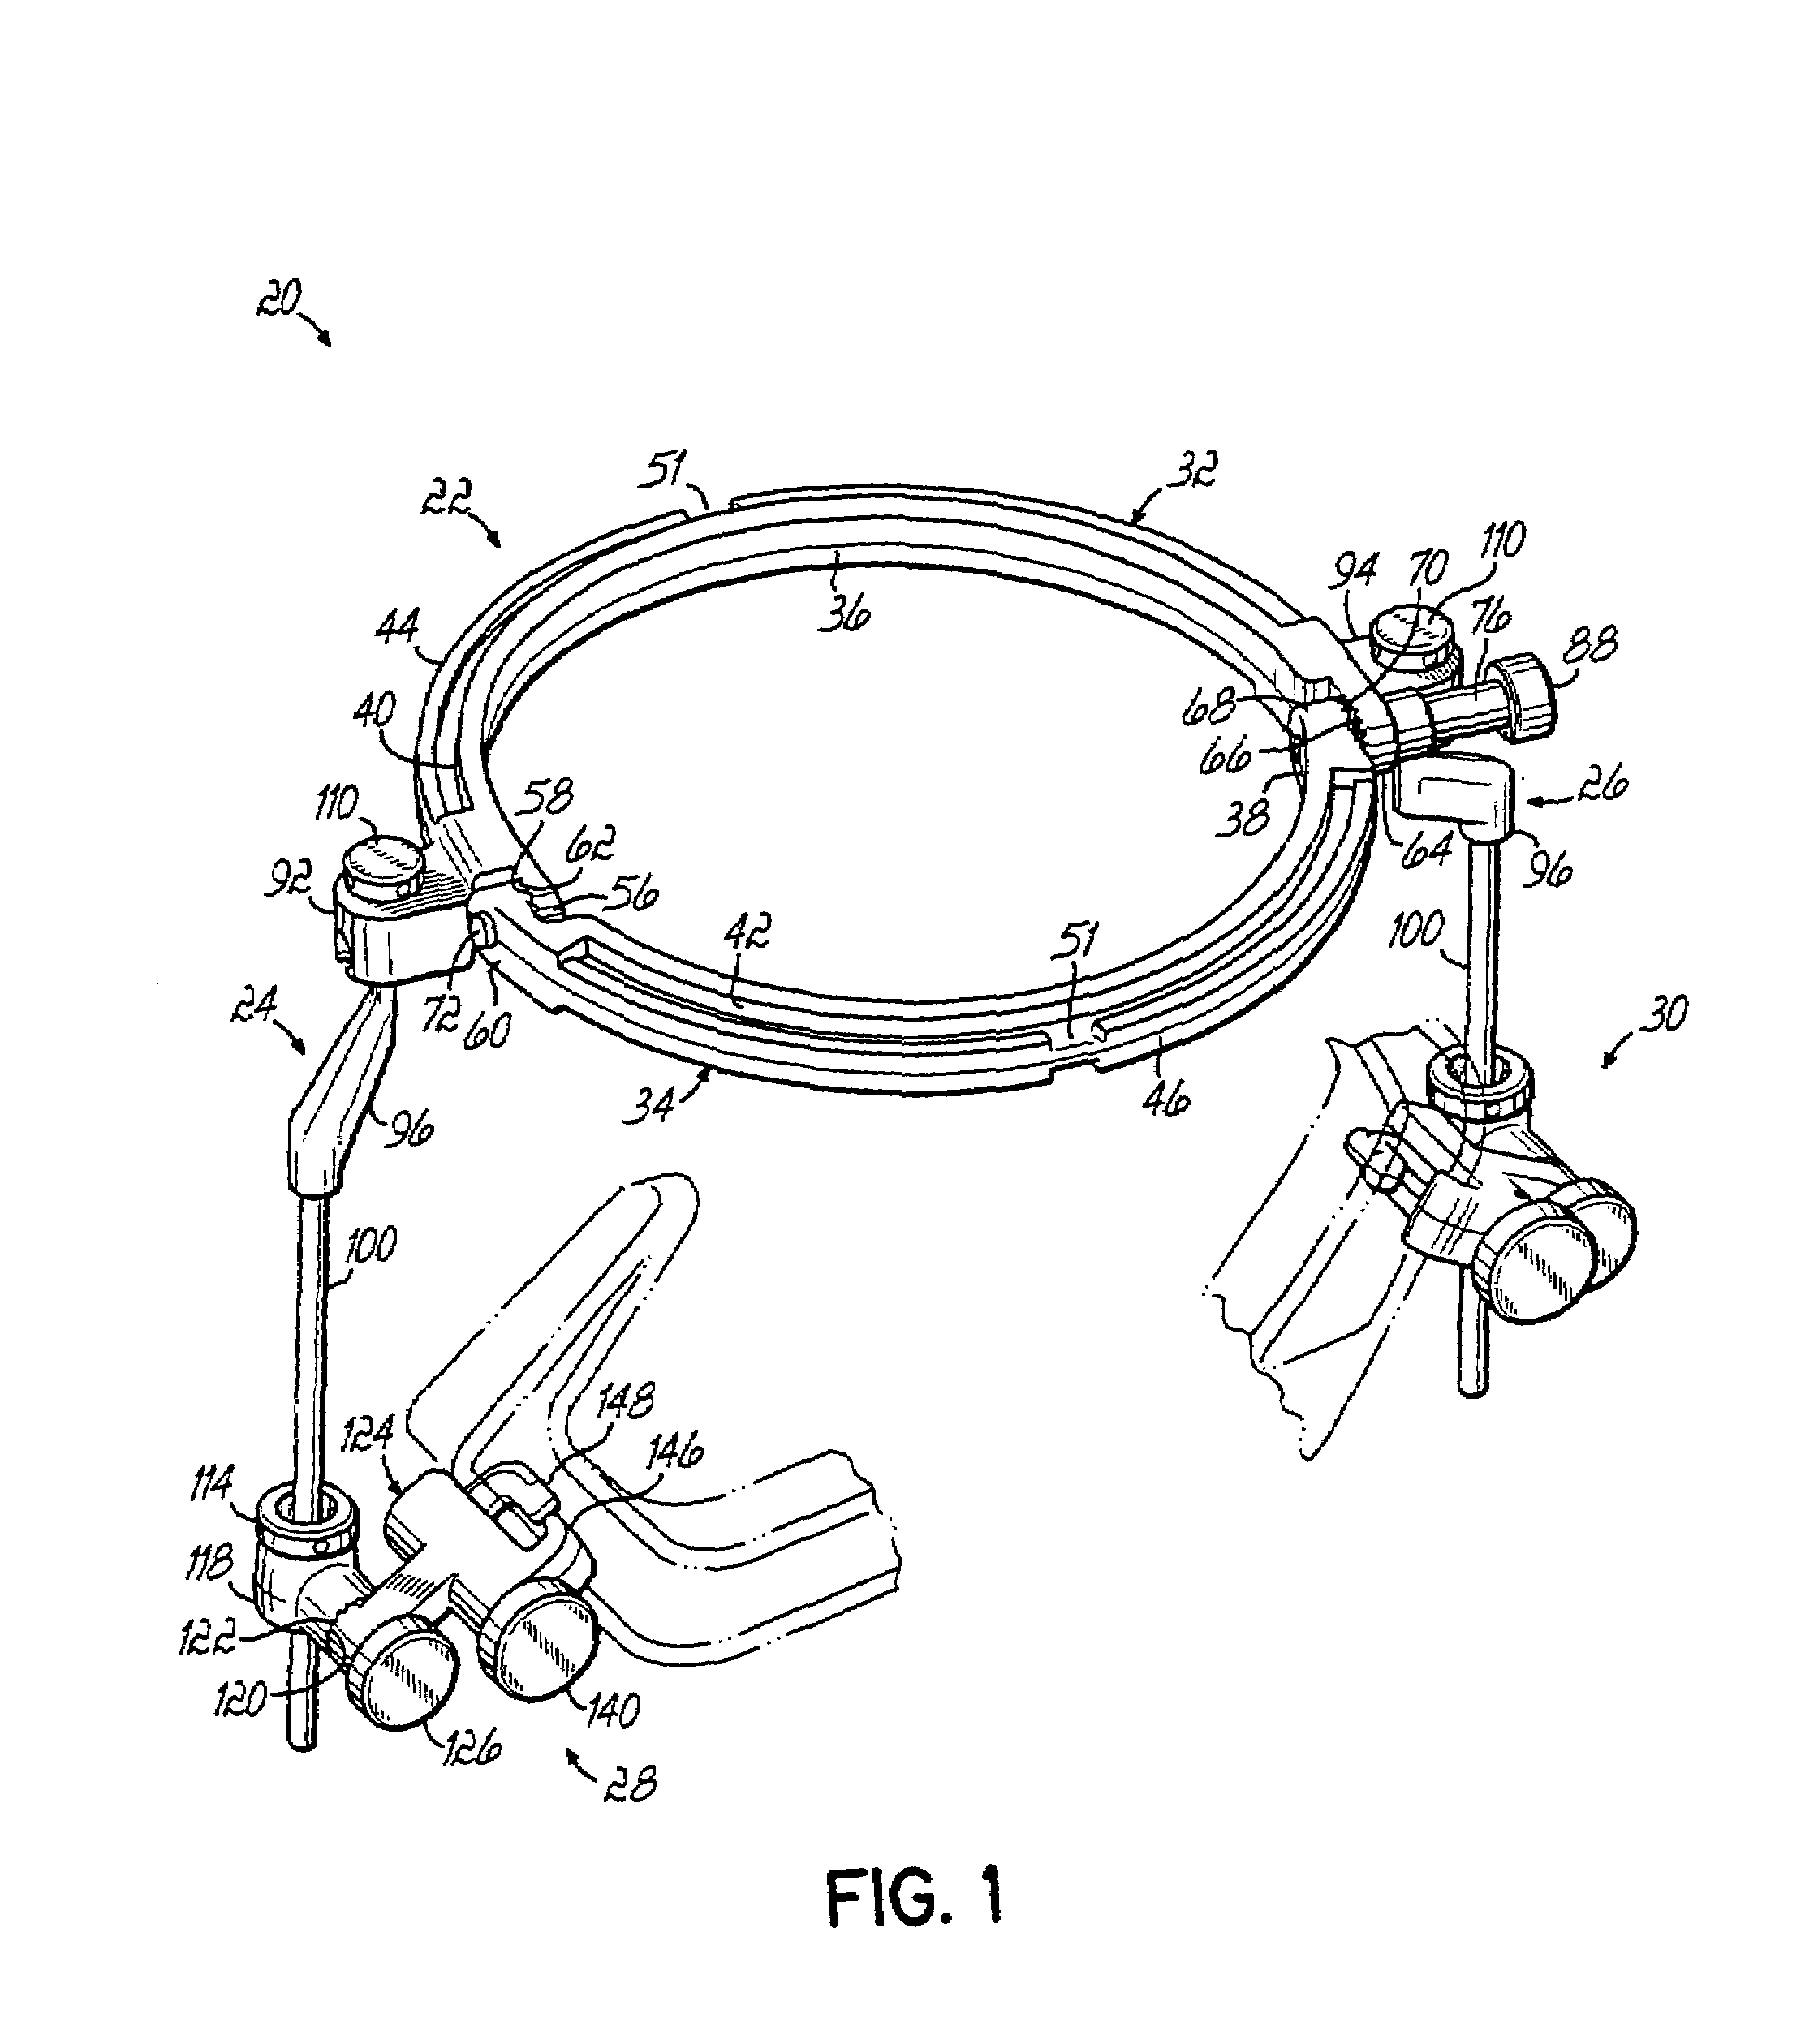 Radiolucent retractor and related components